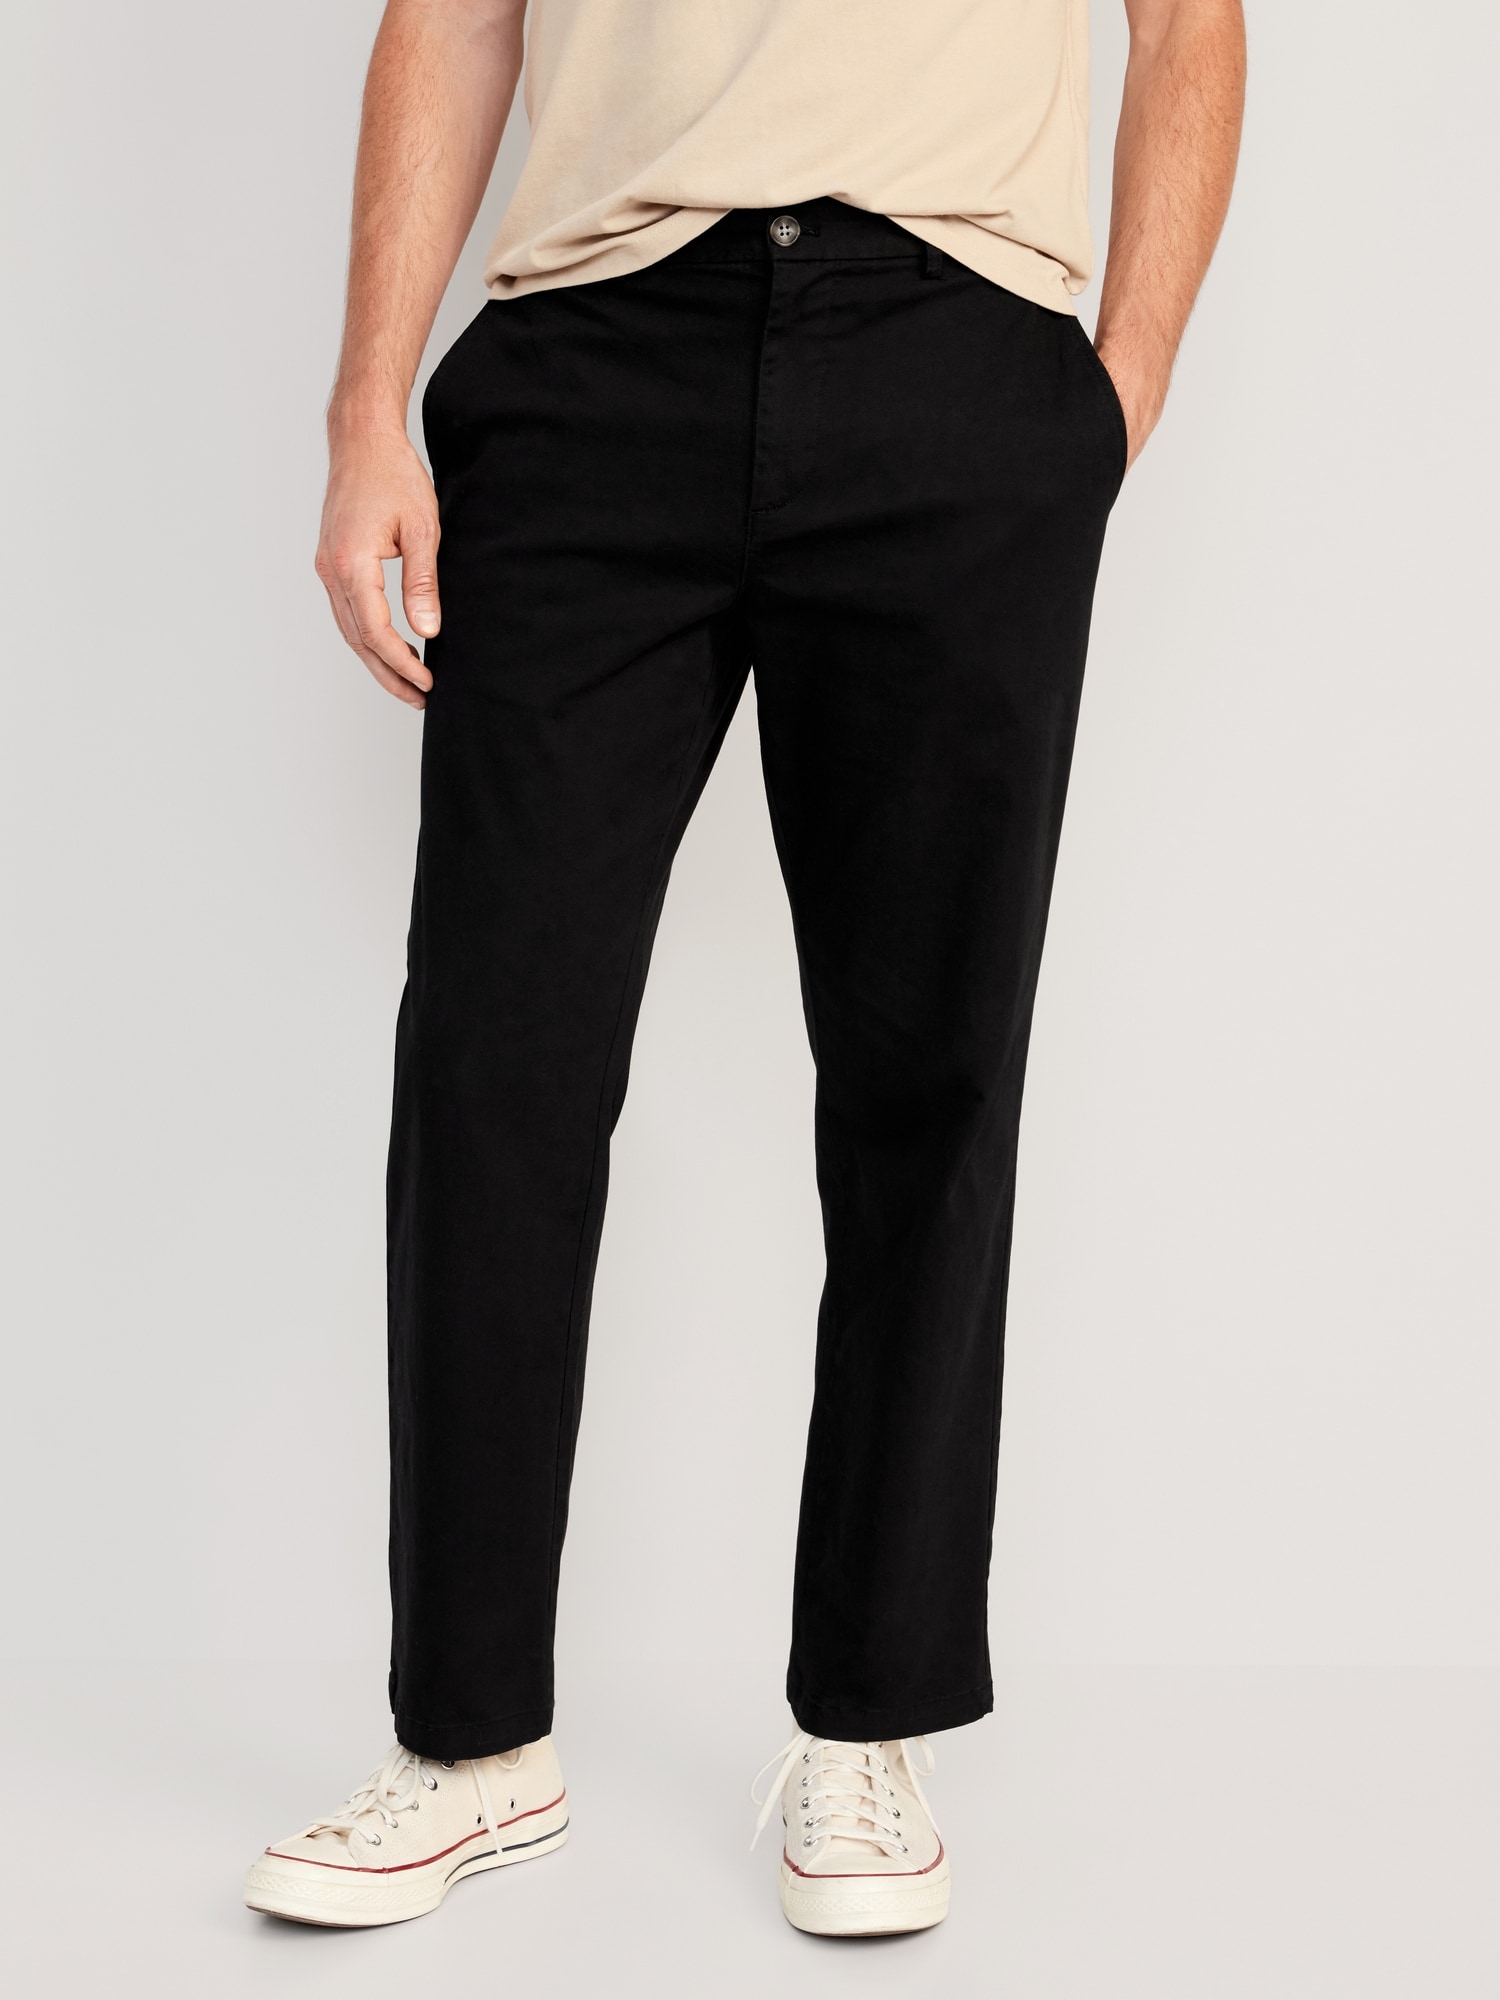 Loose Built-In Flex Rotation Chino Pants